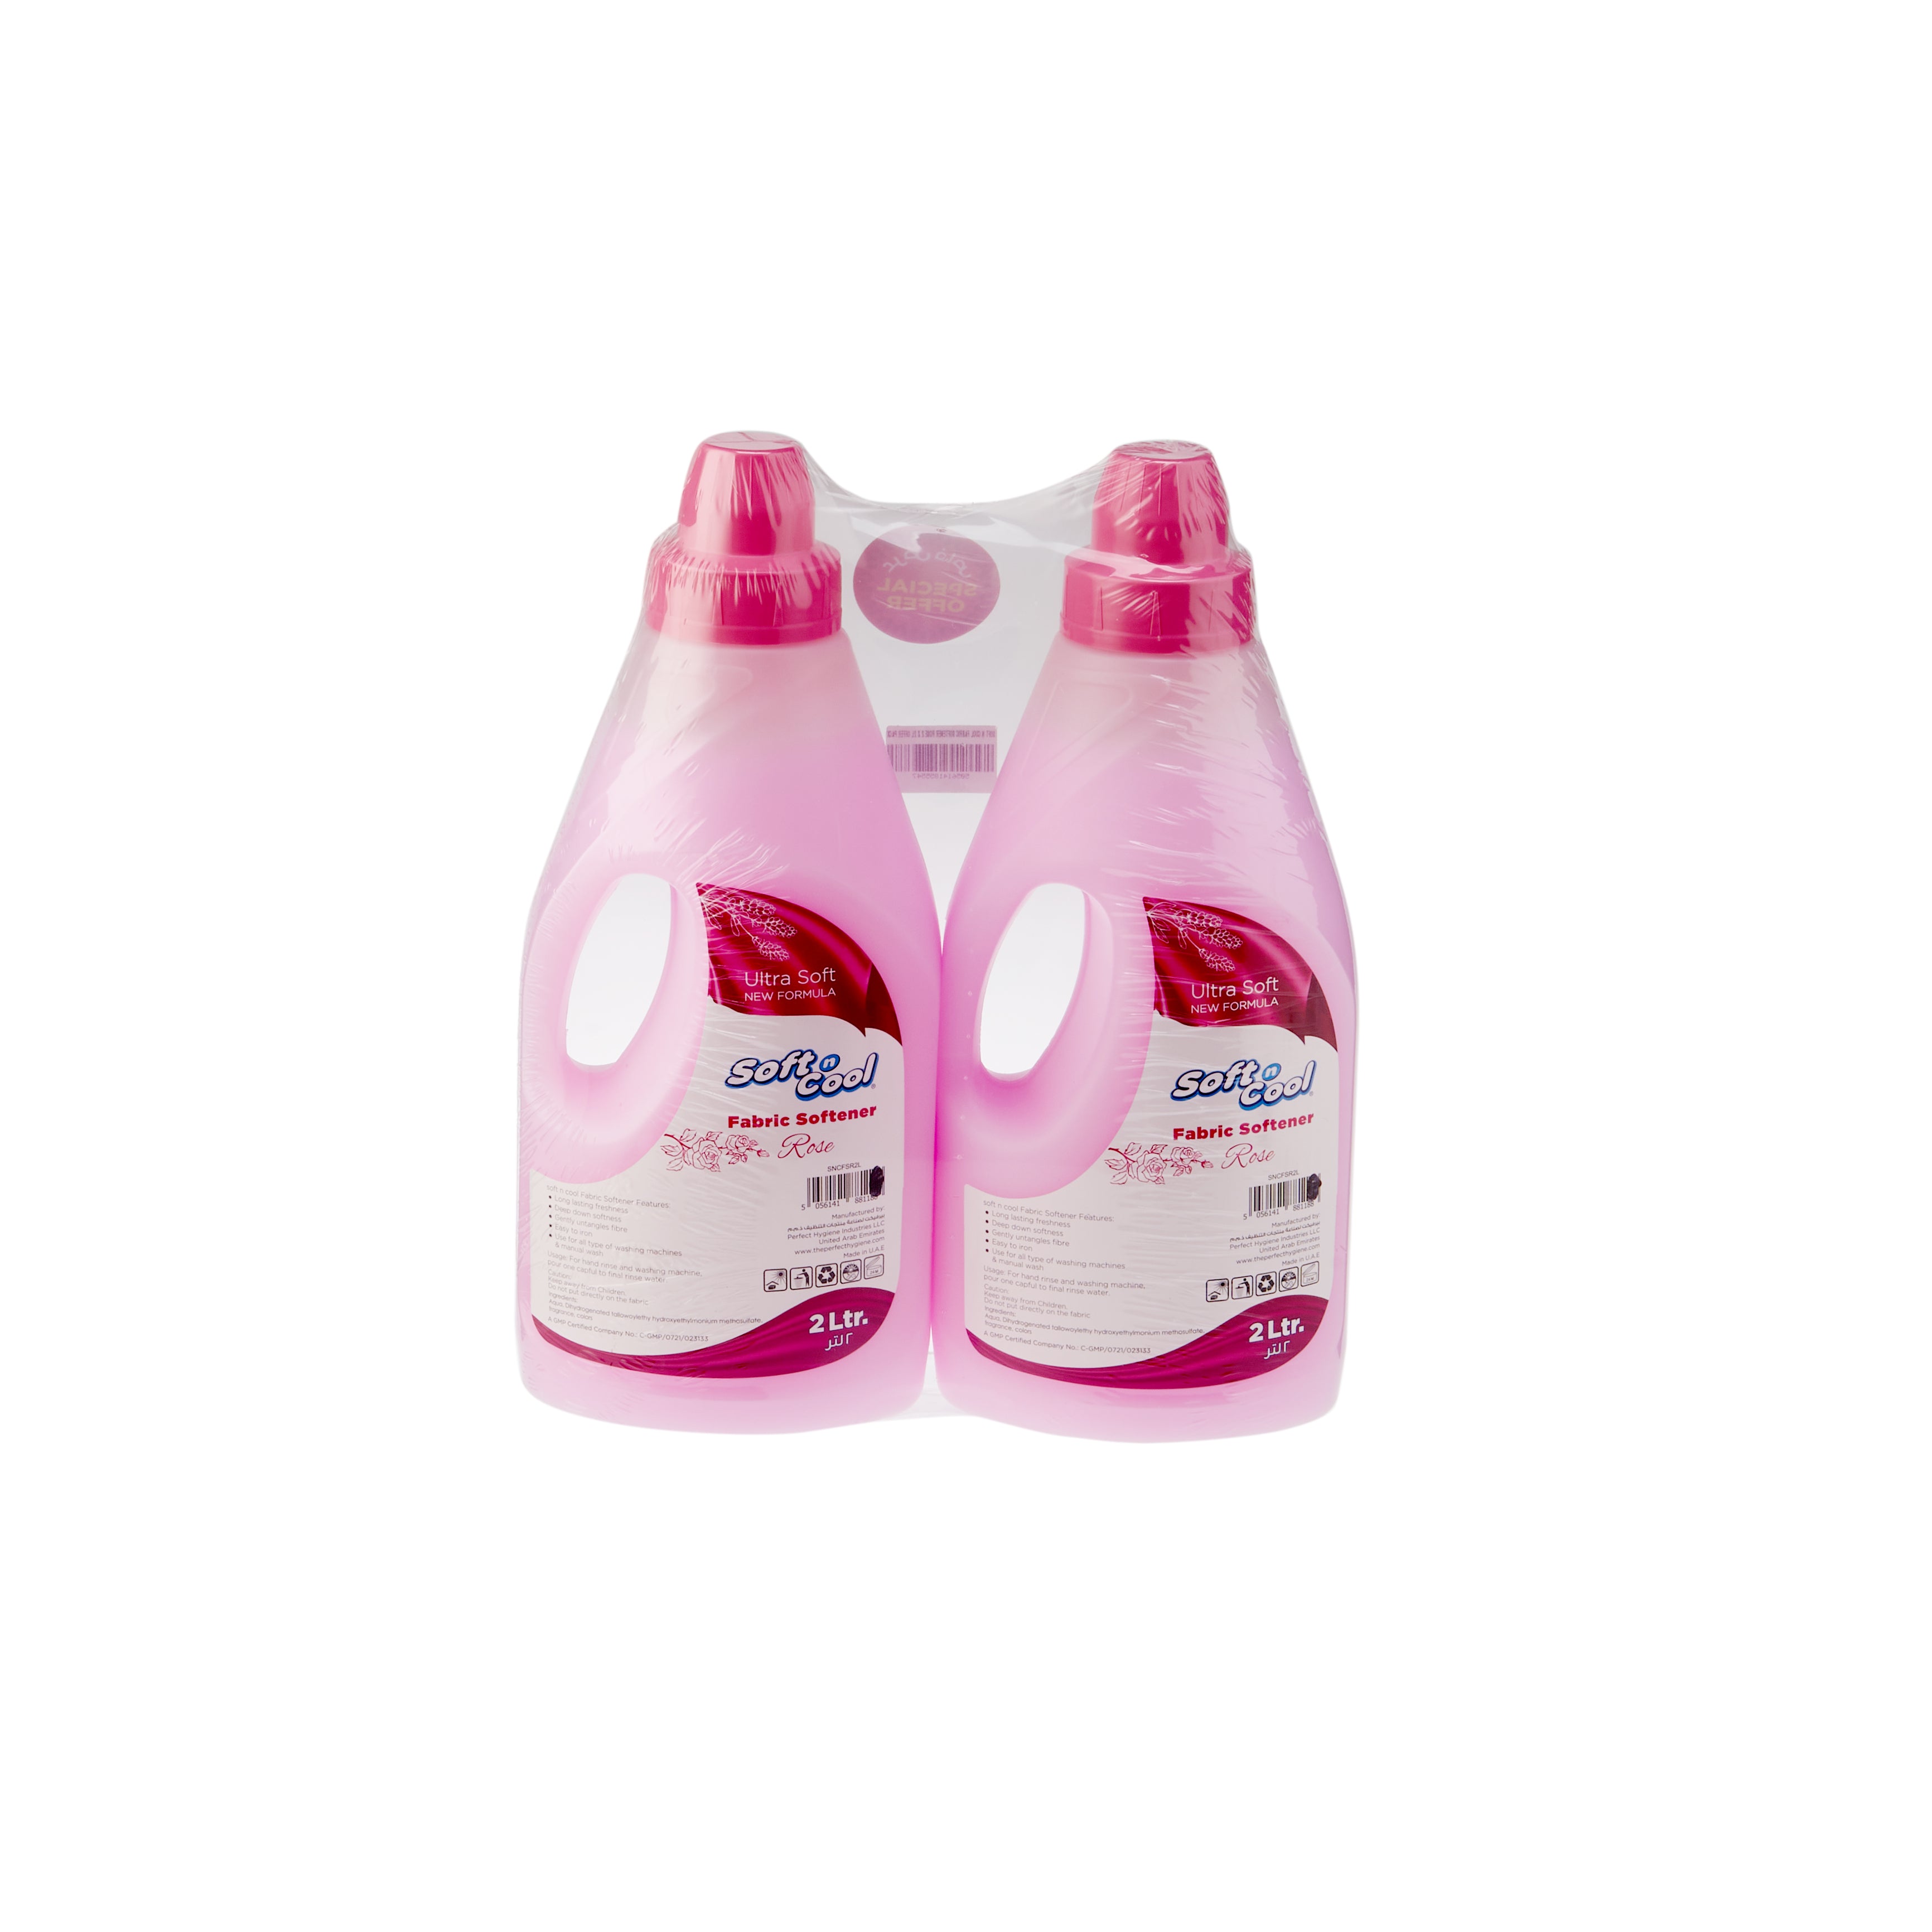 Rose Fabric Softner 2x2 Litres Laundry detergent - Hotpack Global